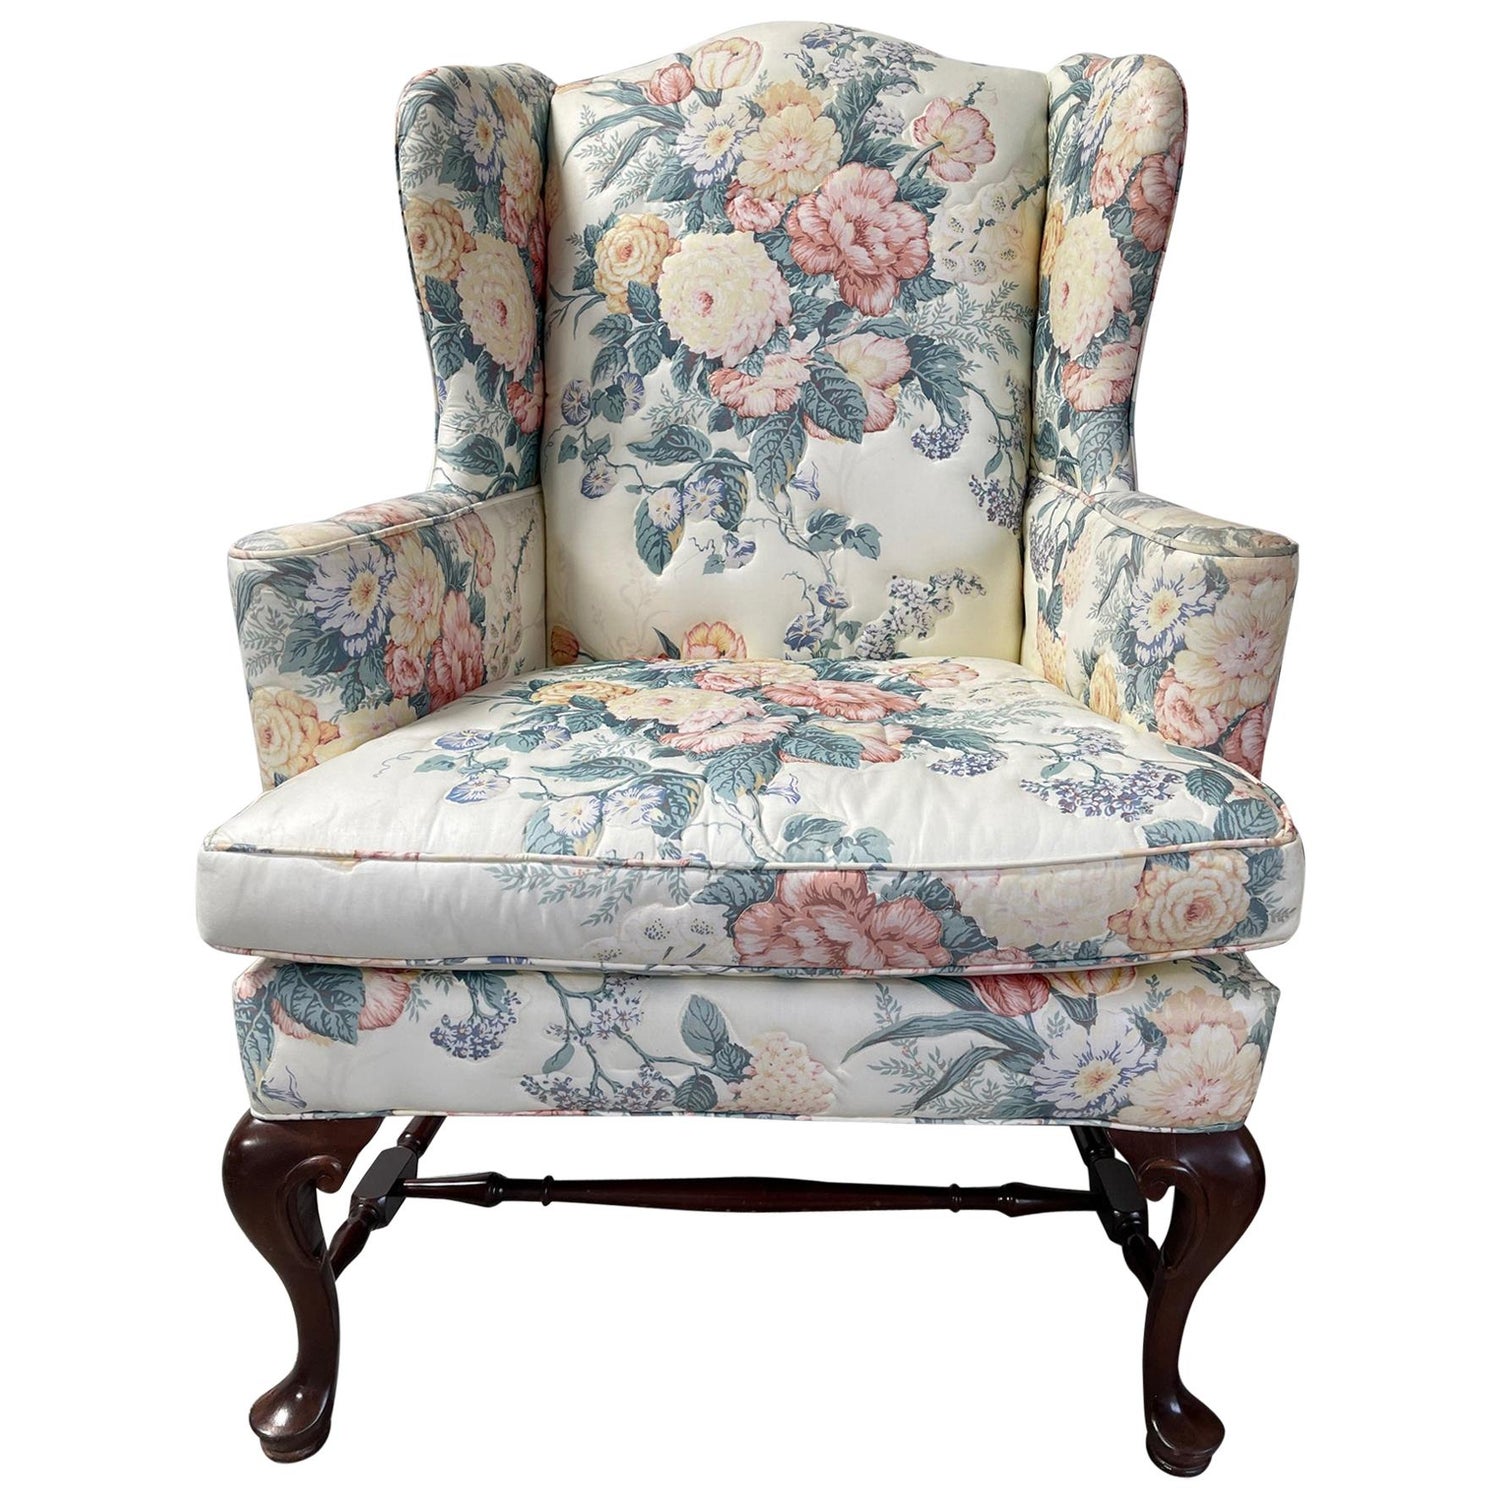 https://a.1stdibscdn.com/upholstered-queen-anne-wingback-chair-with-pad-feet-and-stretcher-20th-century-for-sale/1121189/f_221498721611363359784/22149872_master.jpg?width=1500